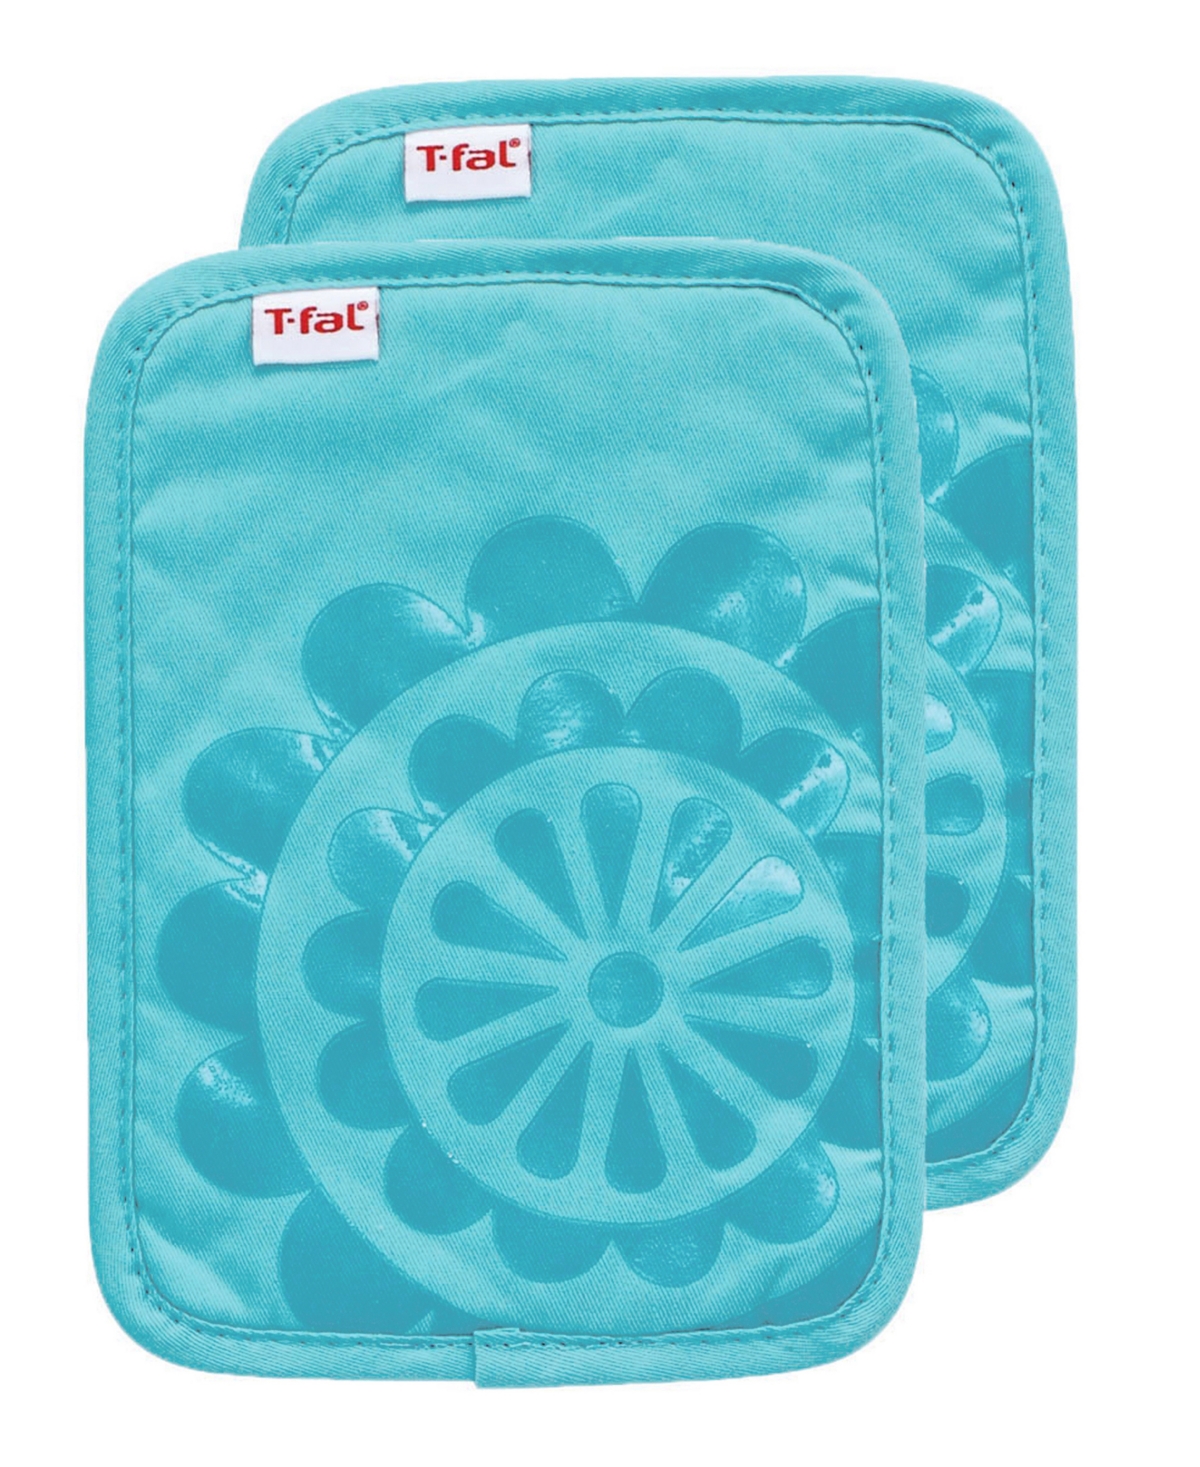 Medallion Print Silicone and Cotton Twill Pot Holder, Set of 2 - Breeze